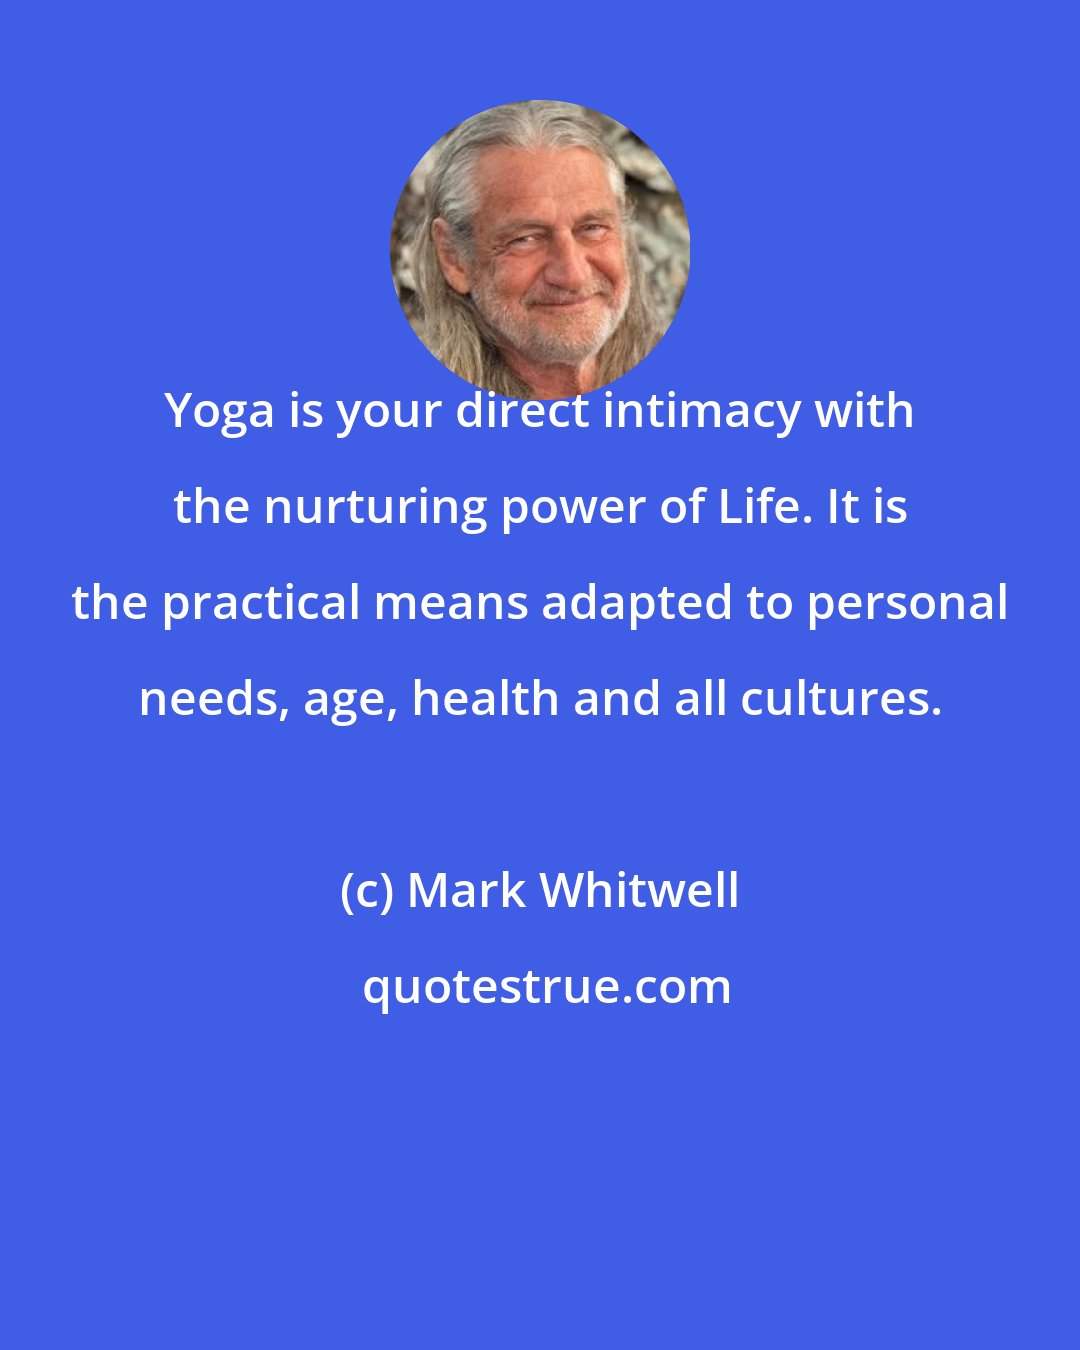 Mark Whitwell: Yoga is your direct intimacy with the nurturing power of Life. It is the practical means adapted to personal needs, age, health and all cultures.